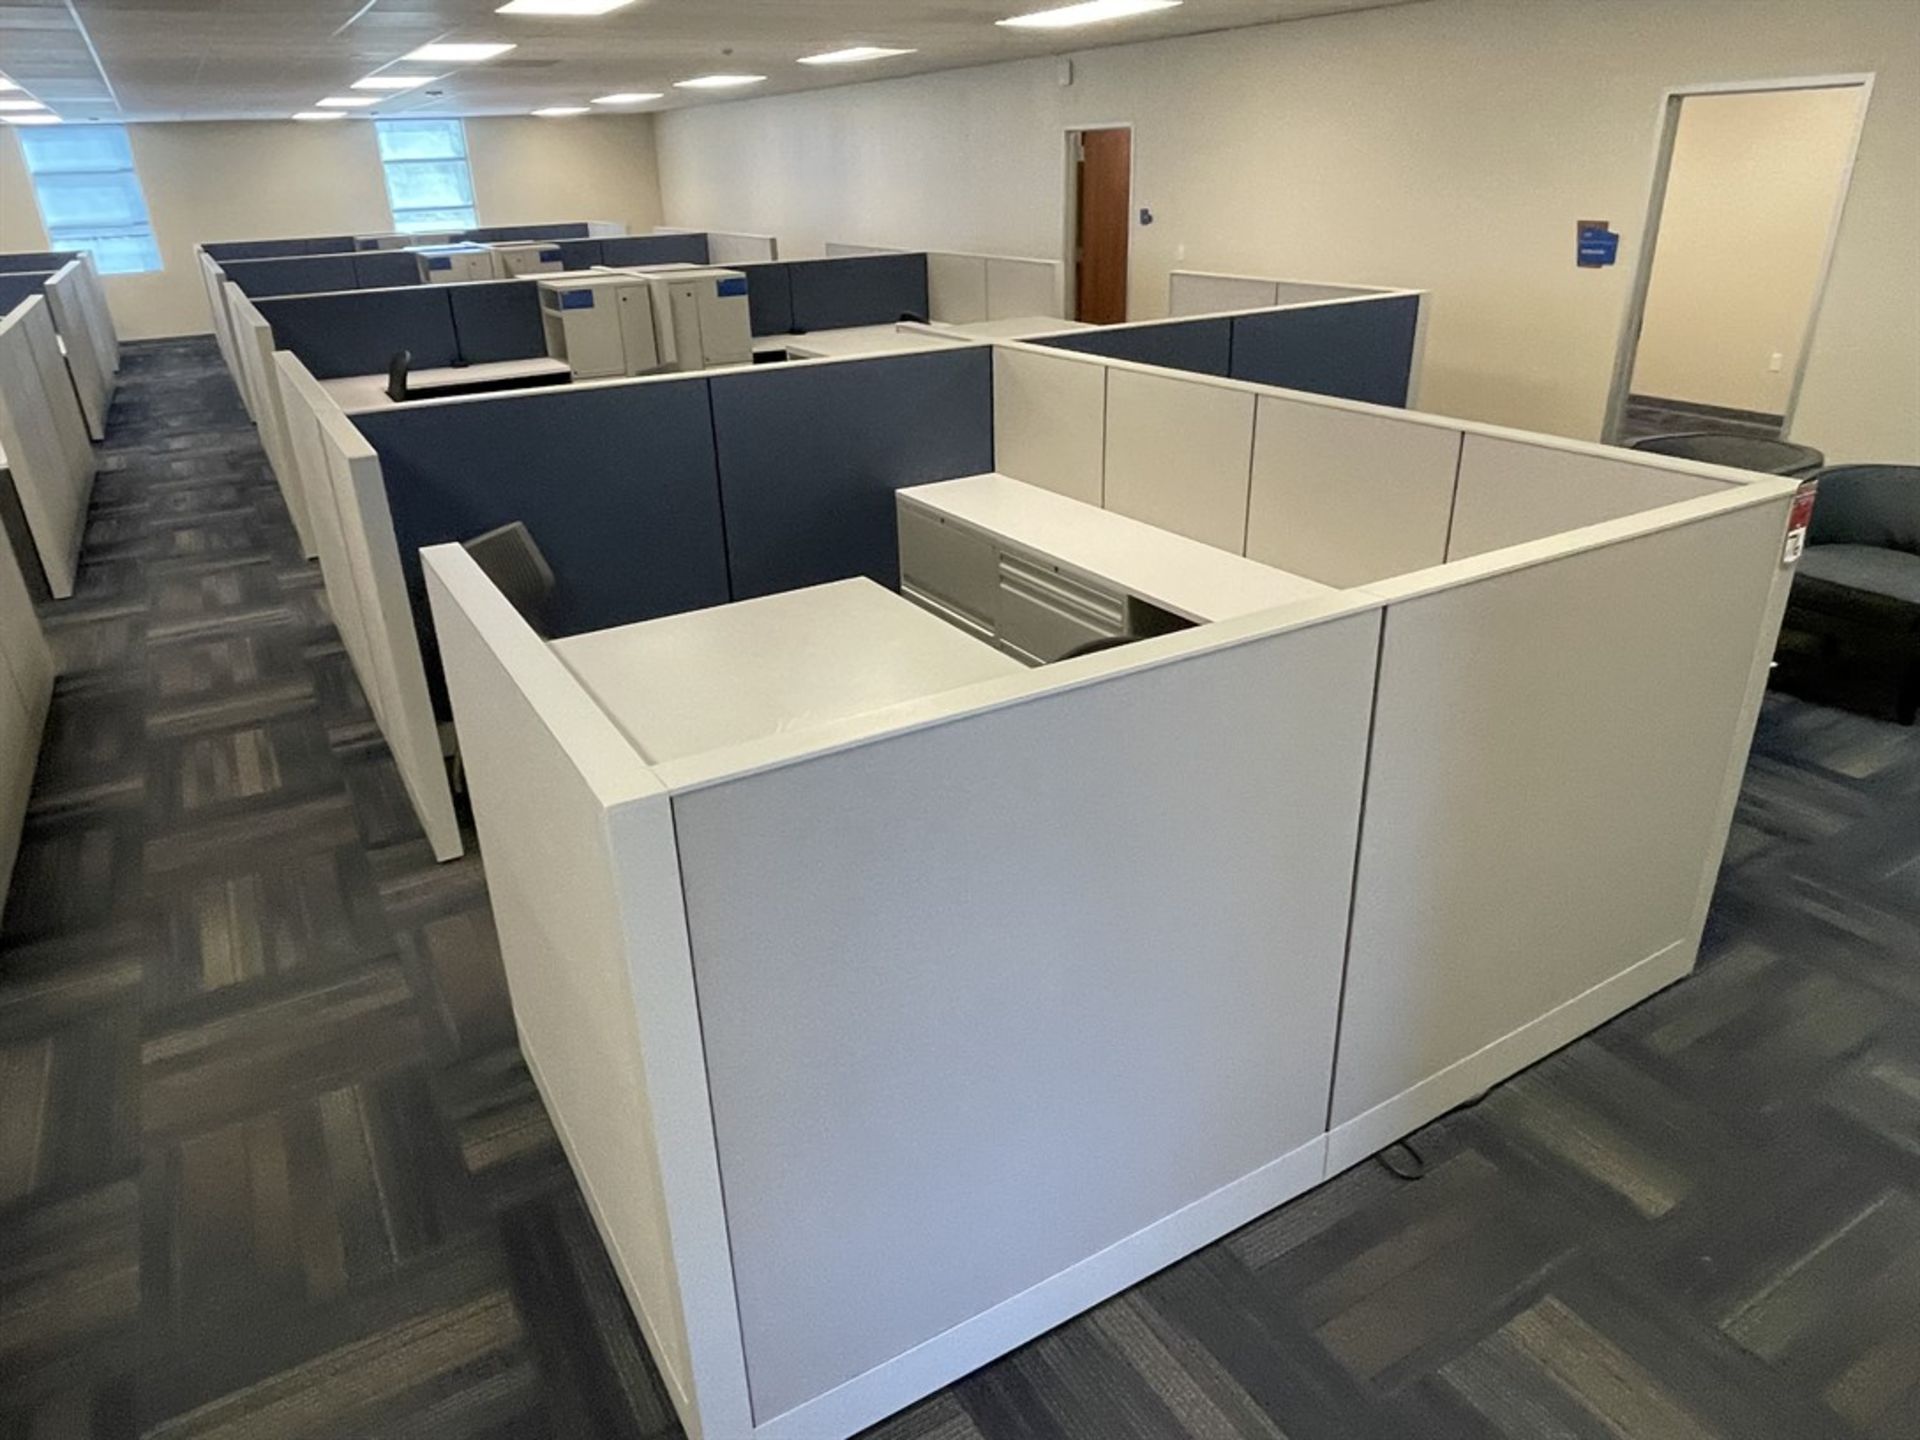 Lot of (11) Cubicles w/ Desk, Chairs, Tables and Cabinets